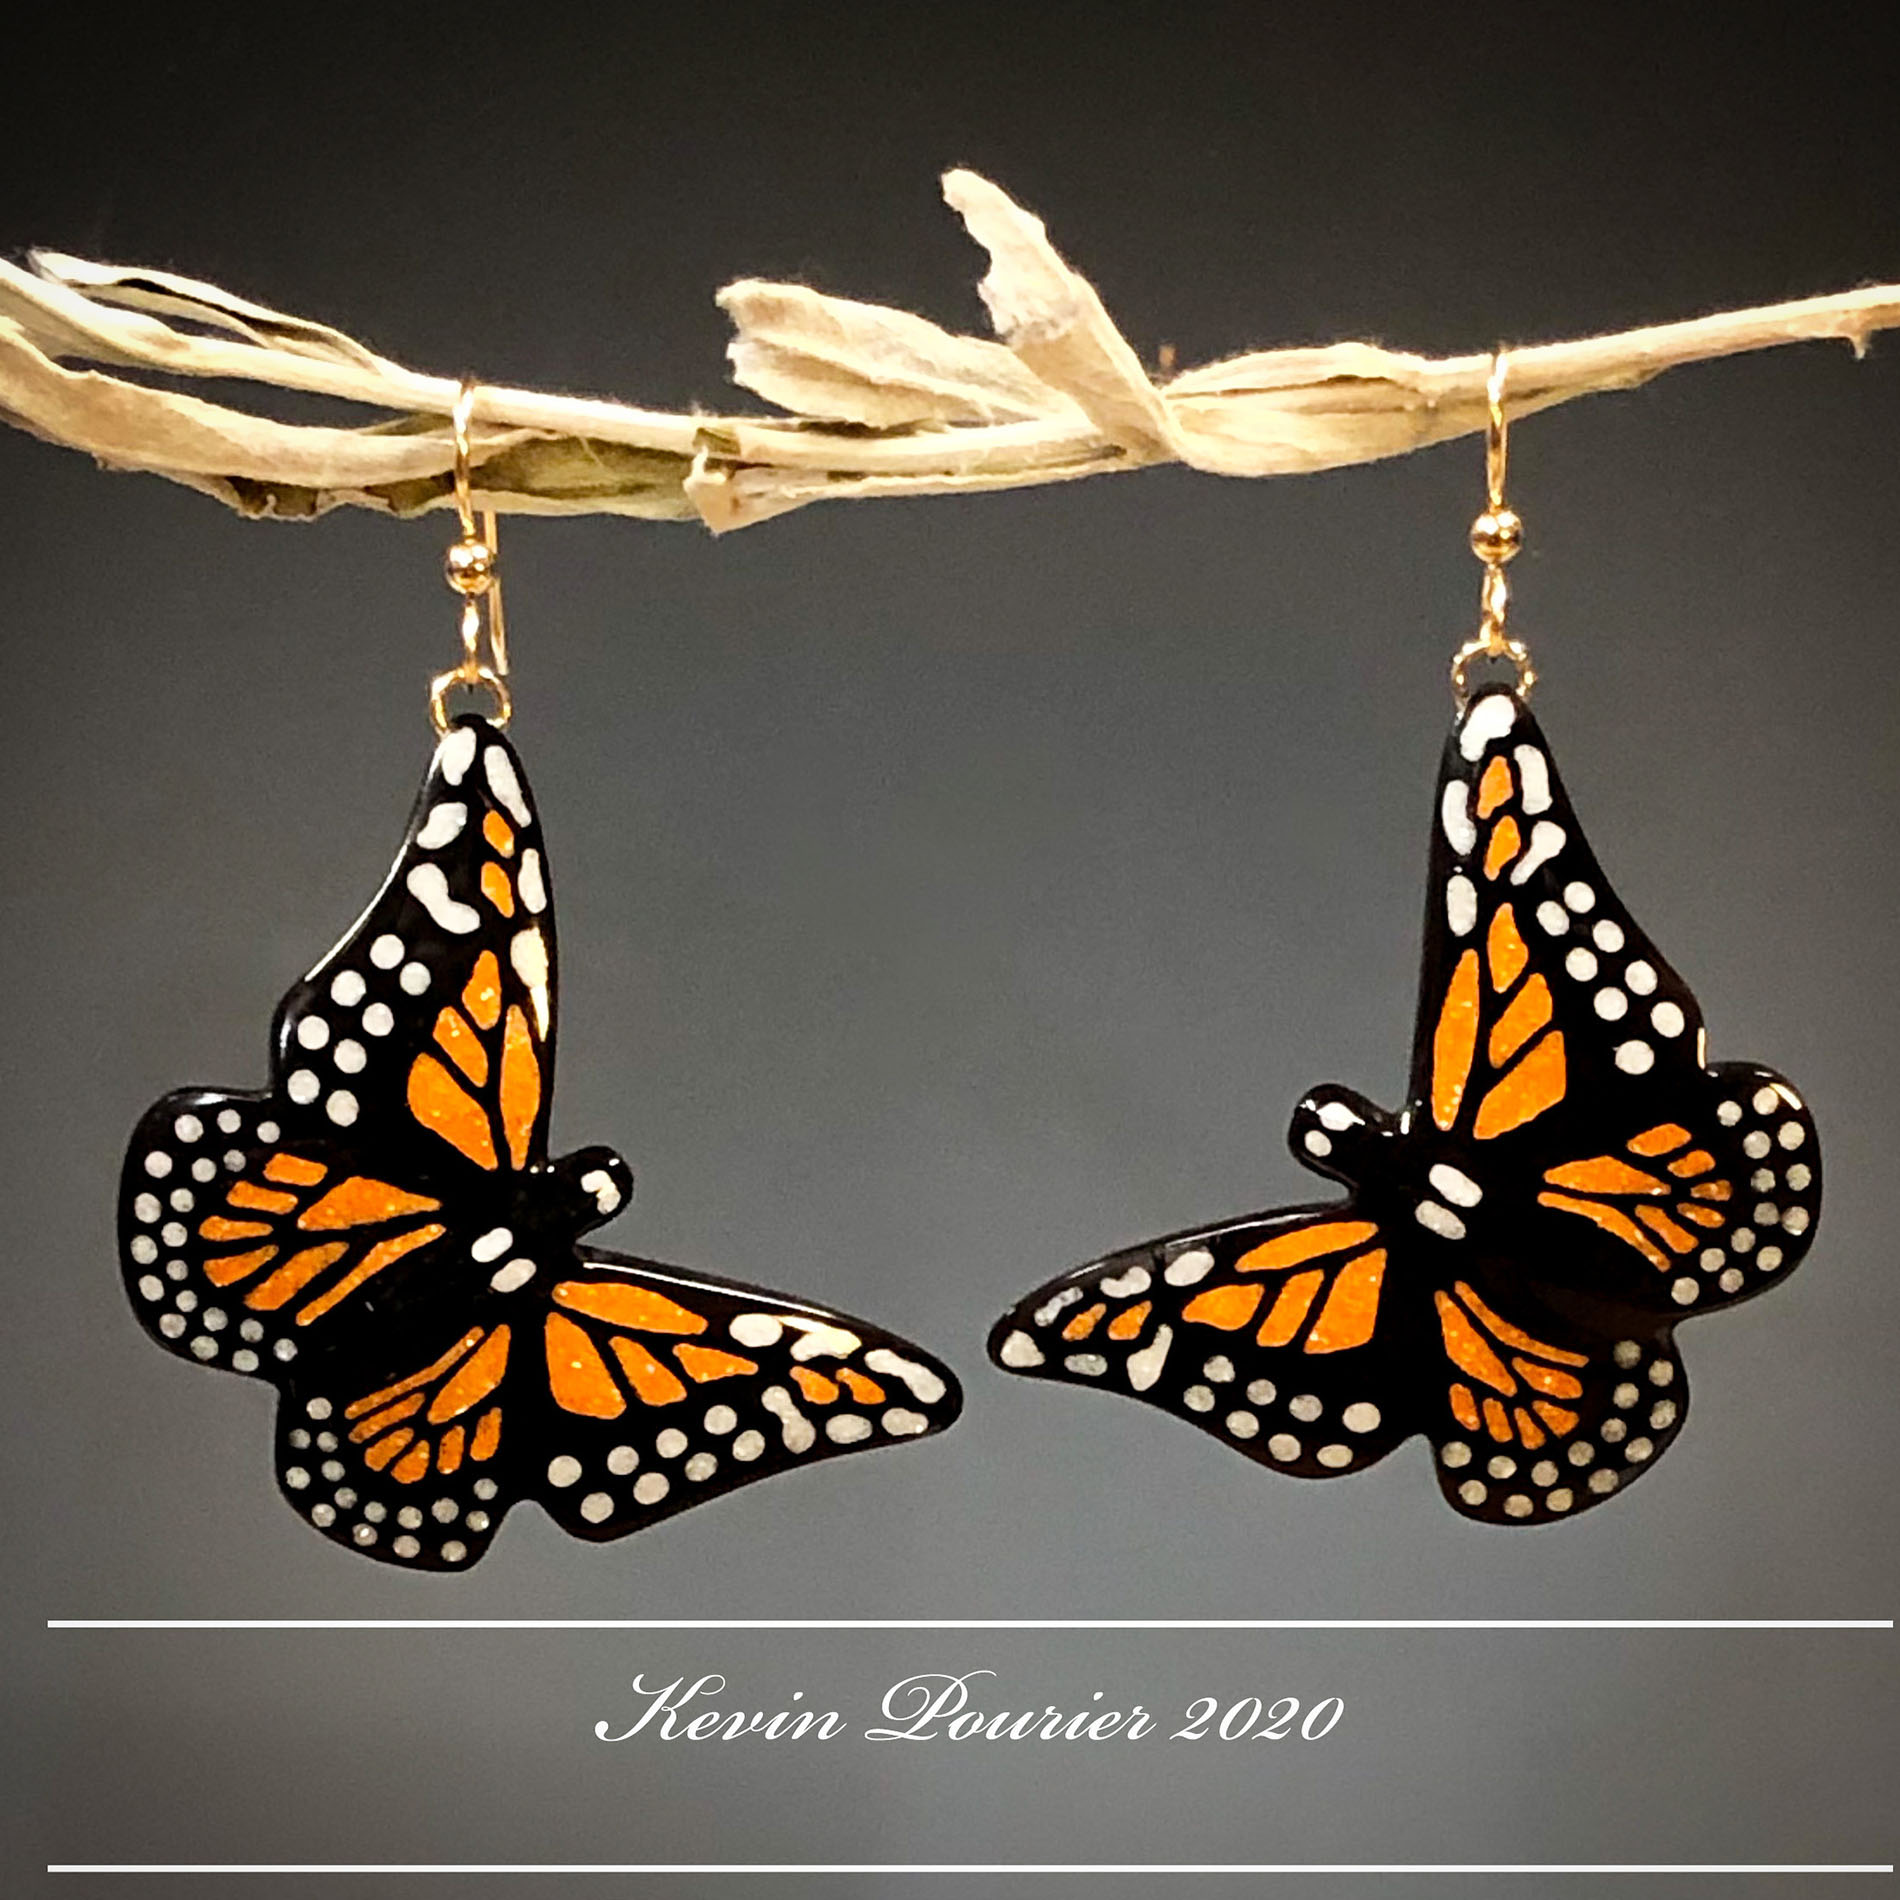 Kevin Pourier, Monarch Earrings (2020). Carved buffalo horn inlaid with orange sandstone and mother of pearl. Dimensions: 1.75” x 1.75”. ©Kevin Pourier 2020. Courtesy of the artist.